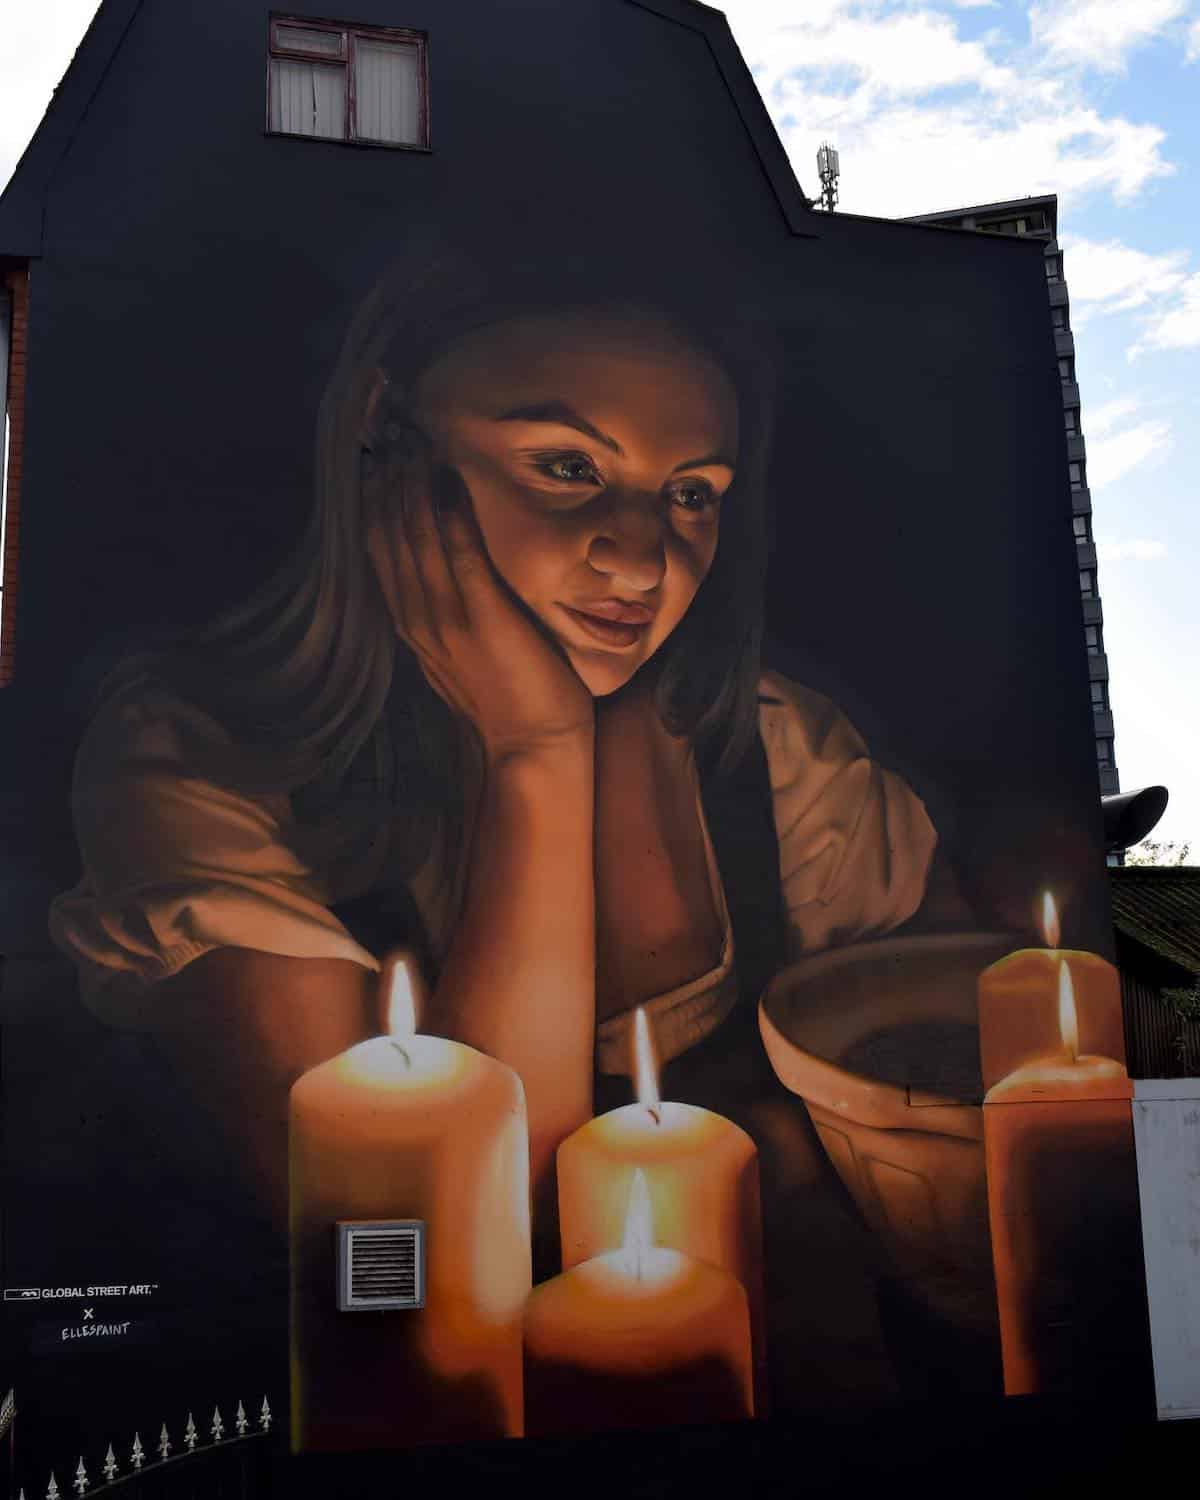 Mural of a Girl With Candles by Elle Koziupa